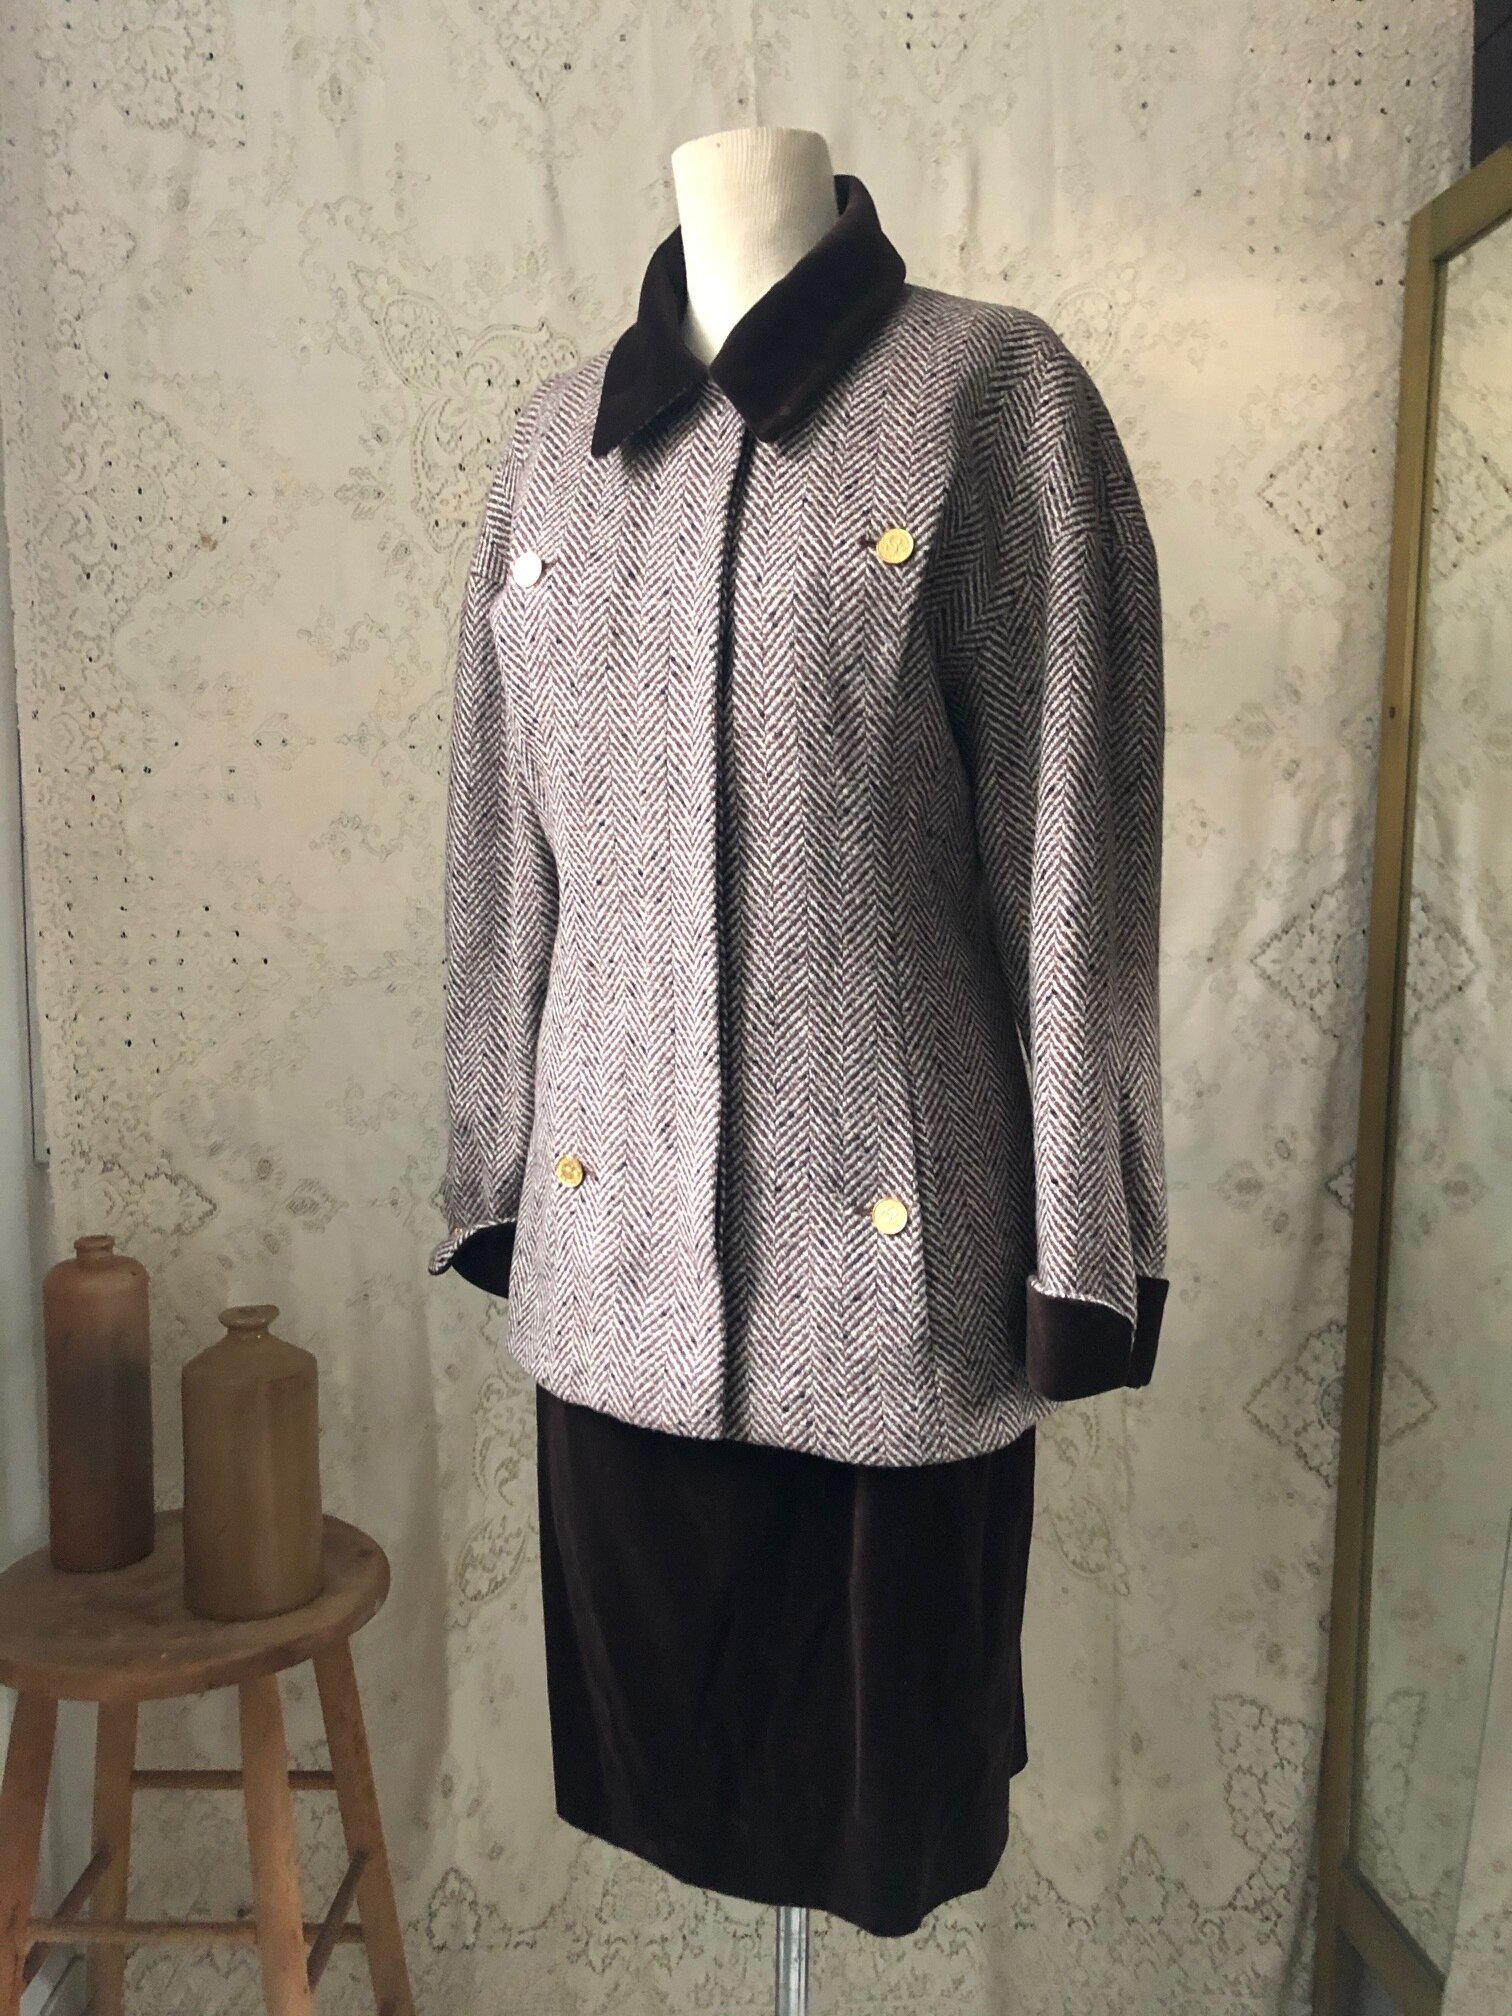 chanel tweed suit size